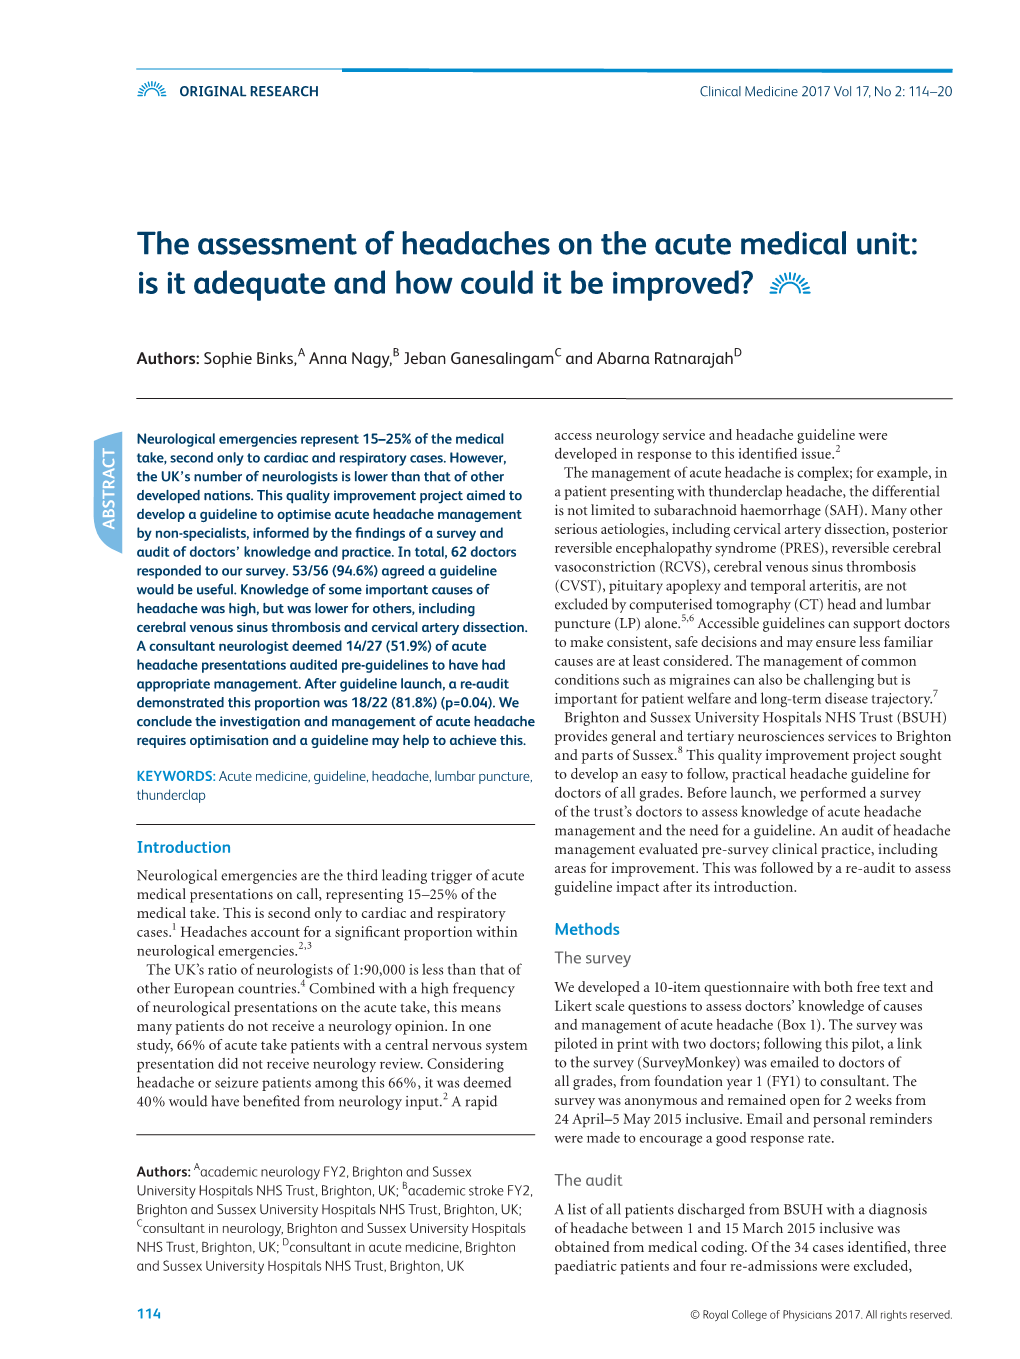 The Assessment of Headaches on the Acute Medical Unit: Is It Adequate and How Could It Be Improved?